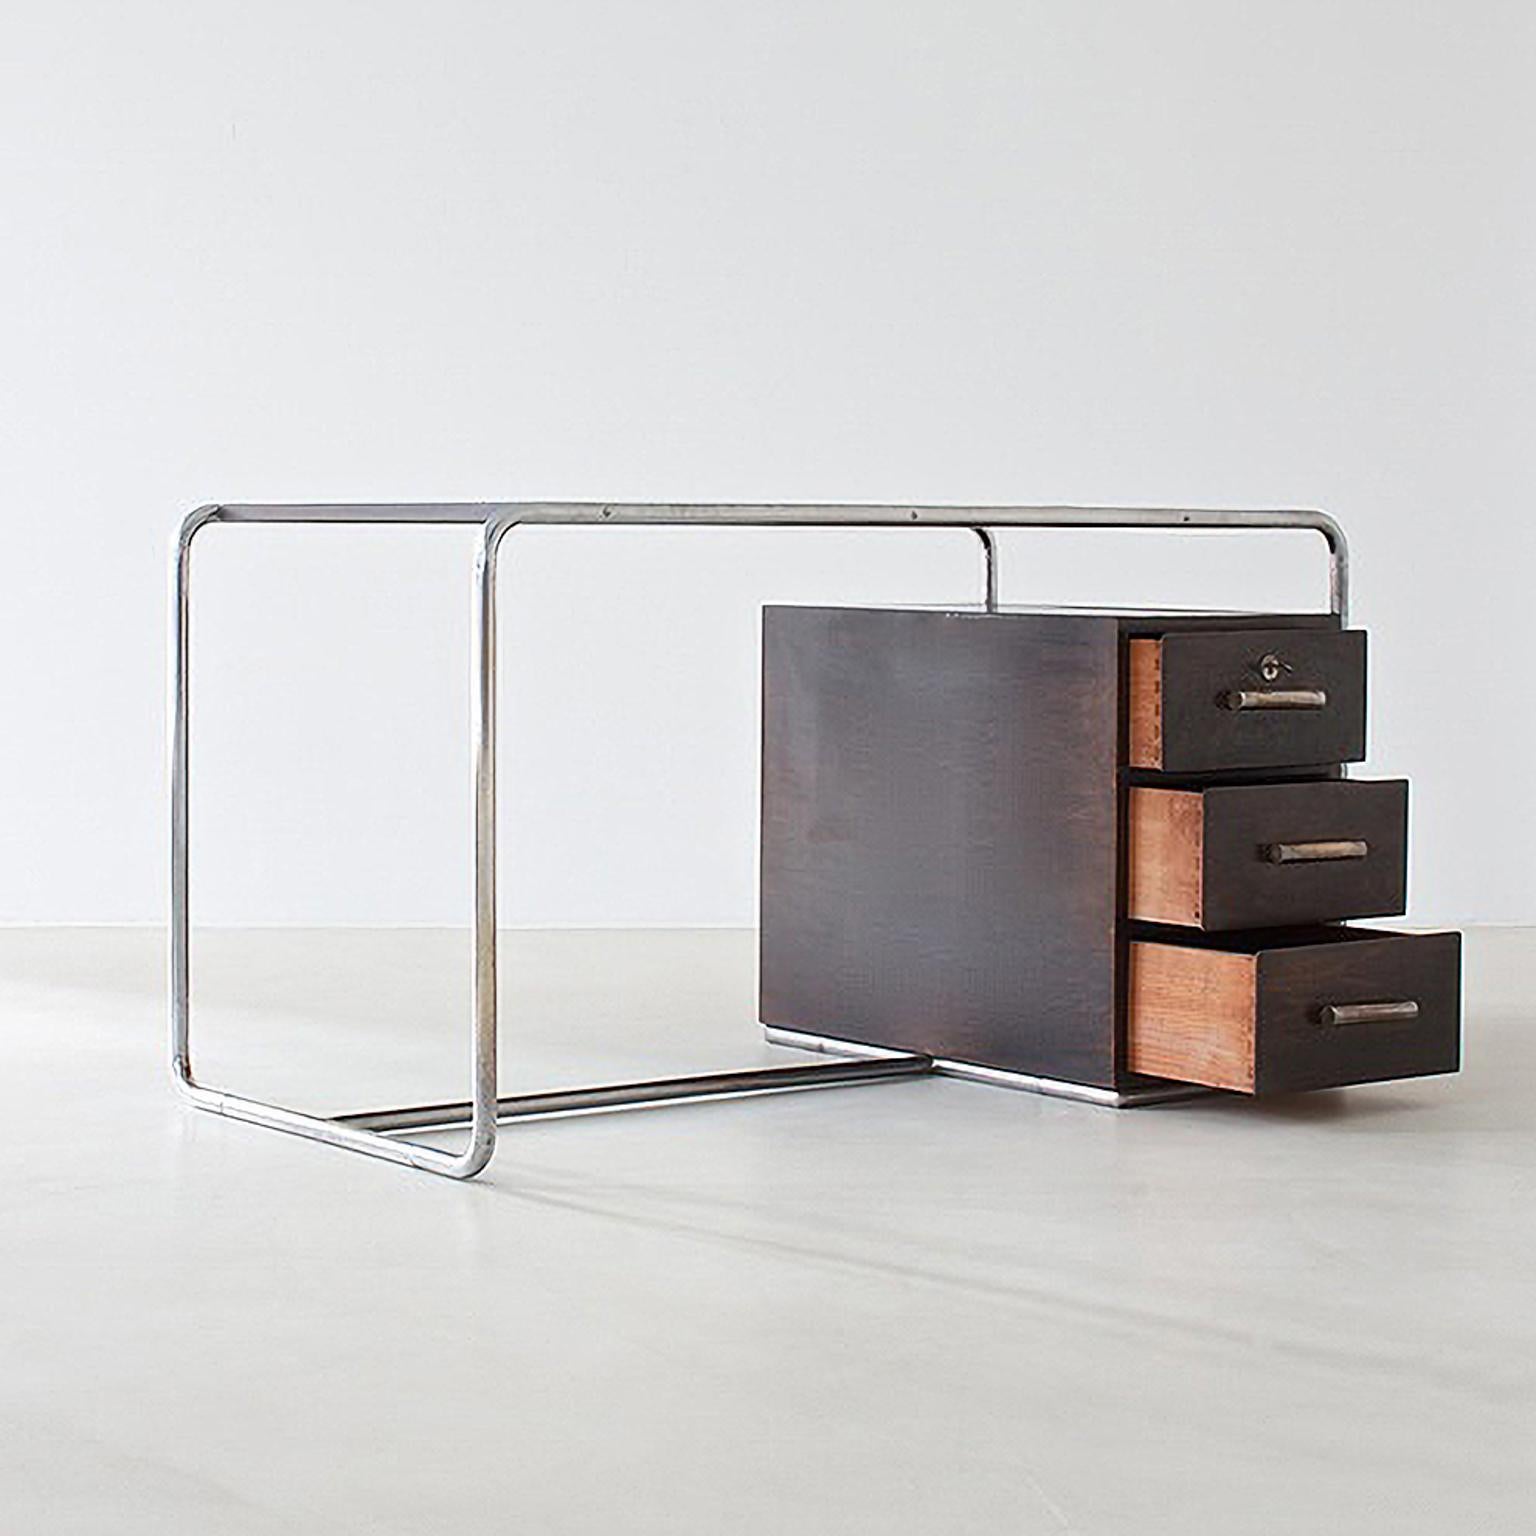 Bauhaus tubular steel desk designed by Bruno Weil (Bèwè) and manufactured by Thonet, Germany, c. 1930